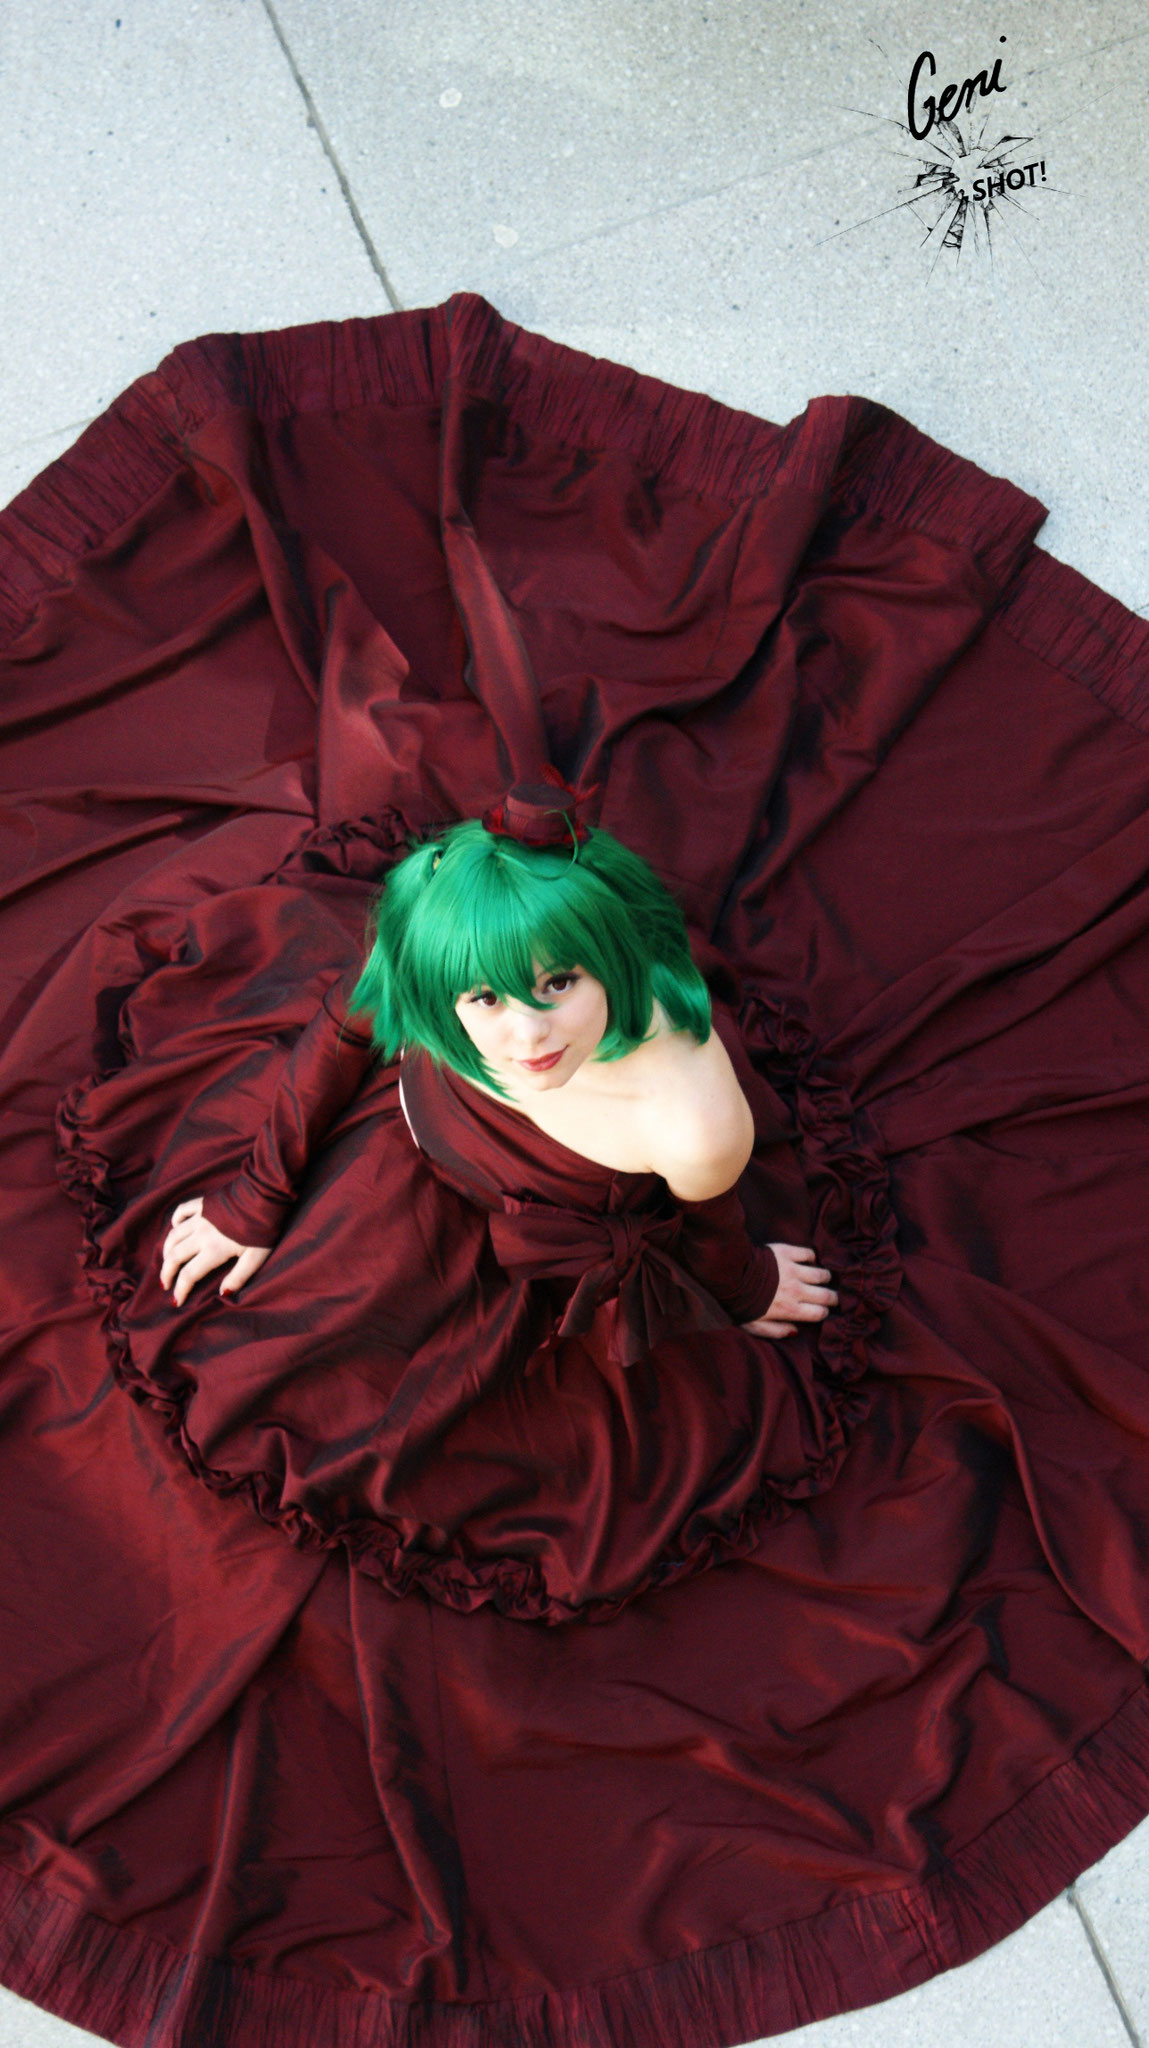 Macross Frontier - Ranka Lee / Cosplayer GeniMonster / Photographer (unknown) - CC-BY-NC